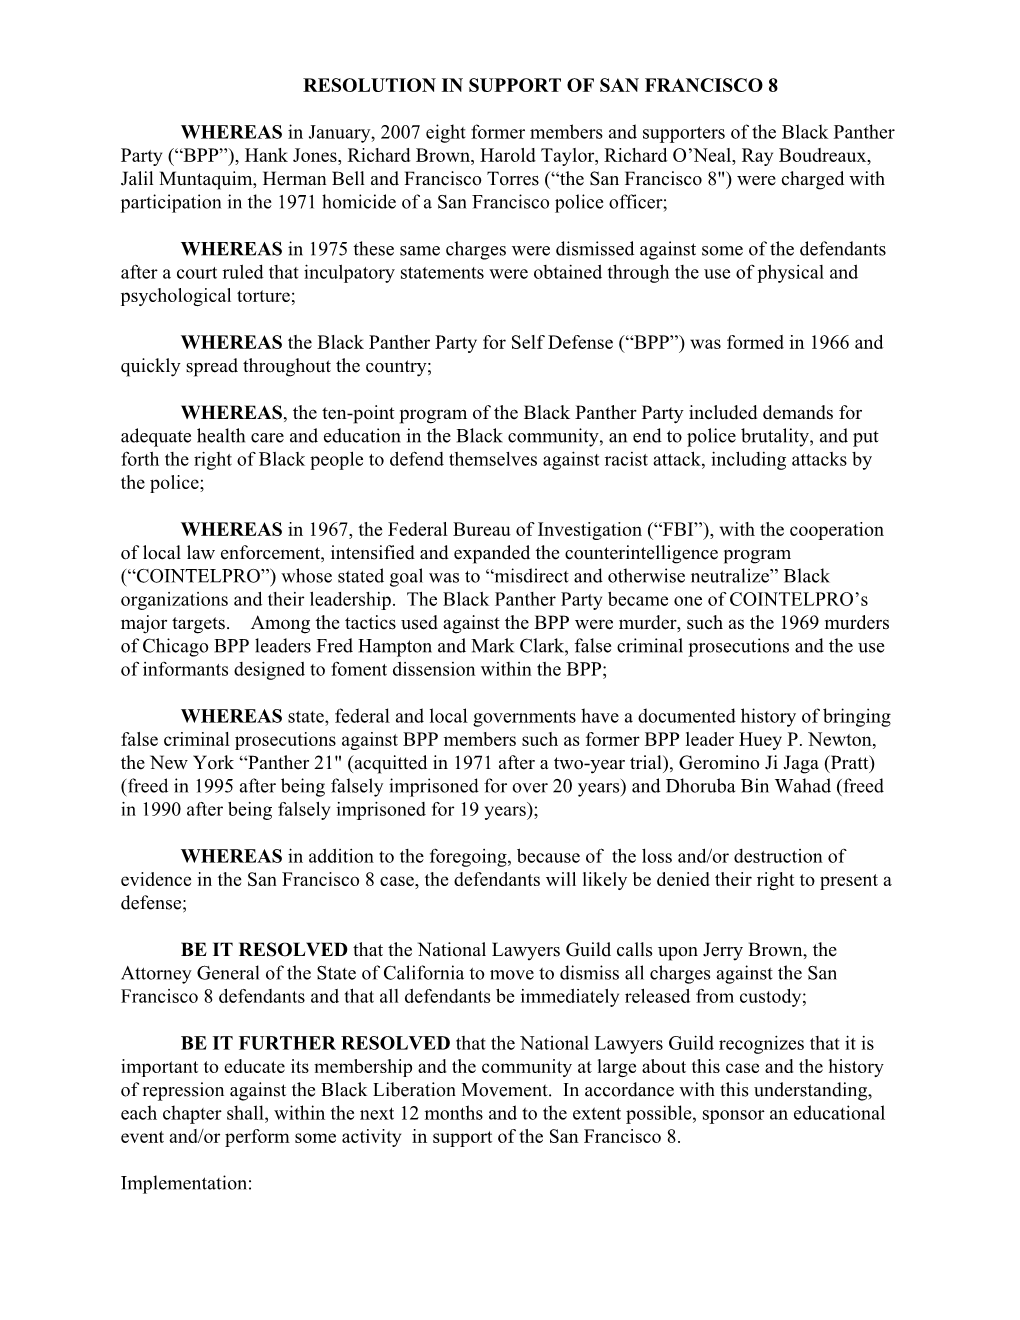 Resolution in Support of San Francisco 8